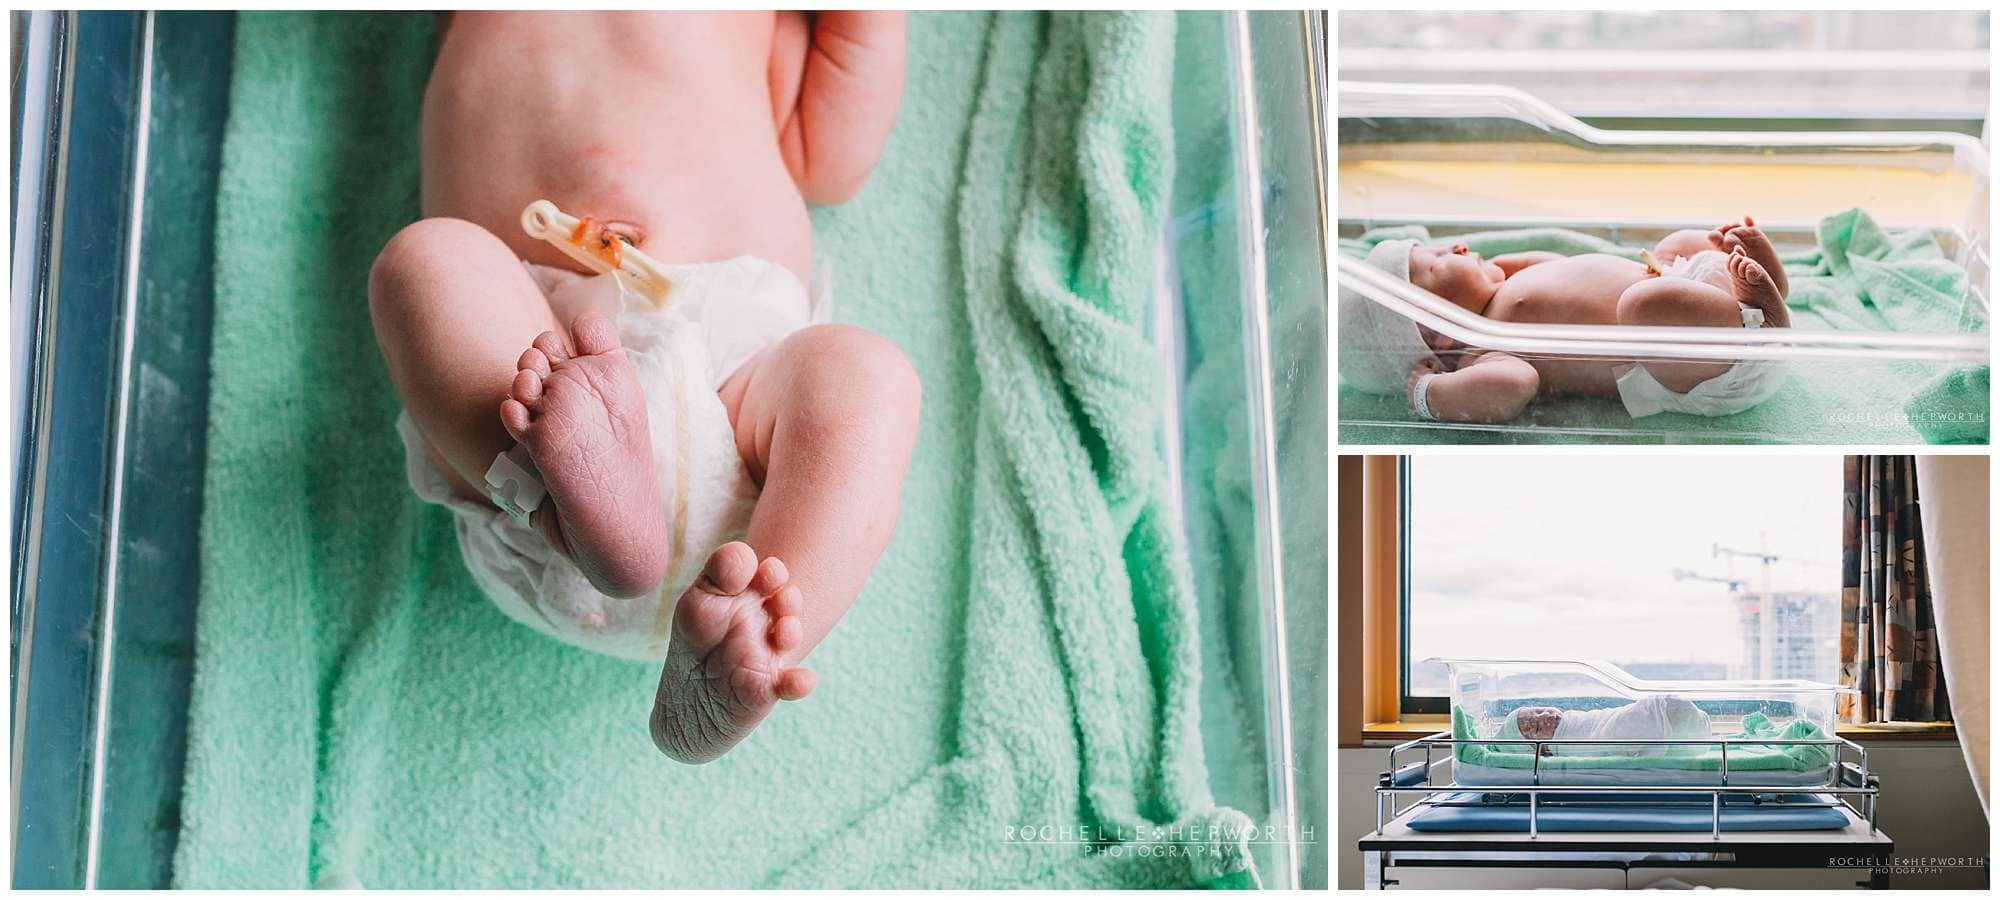 photo showing legs of newborn baby in hospital crib with green blanket